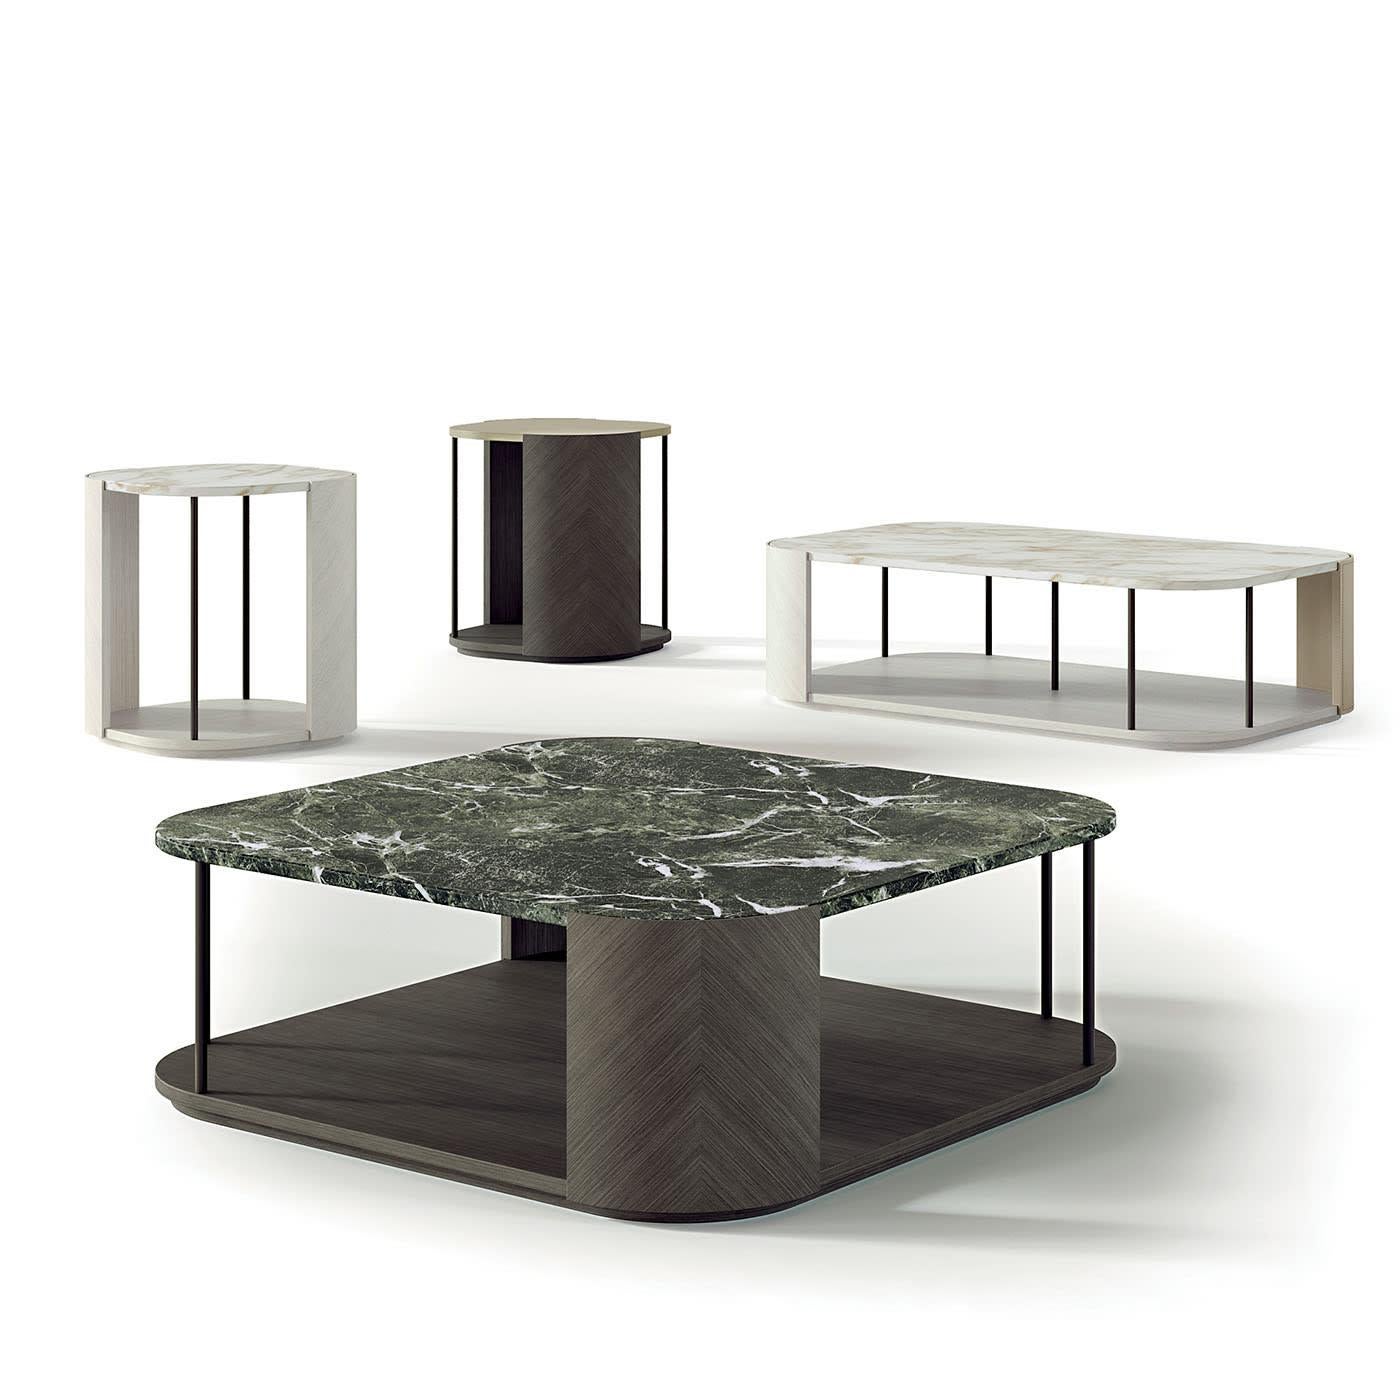 Coffee table inspired by the Gae bookcase. The curved elements are in light Tay and leather with a matt gold Calacatta marble top. Metal supports are in bronze-gold finish.